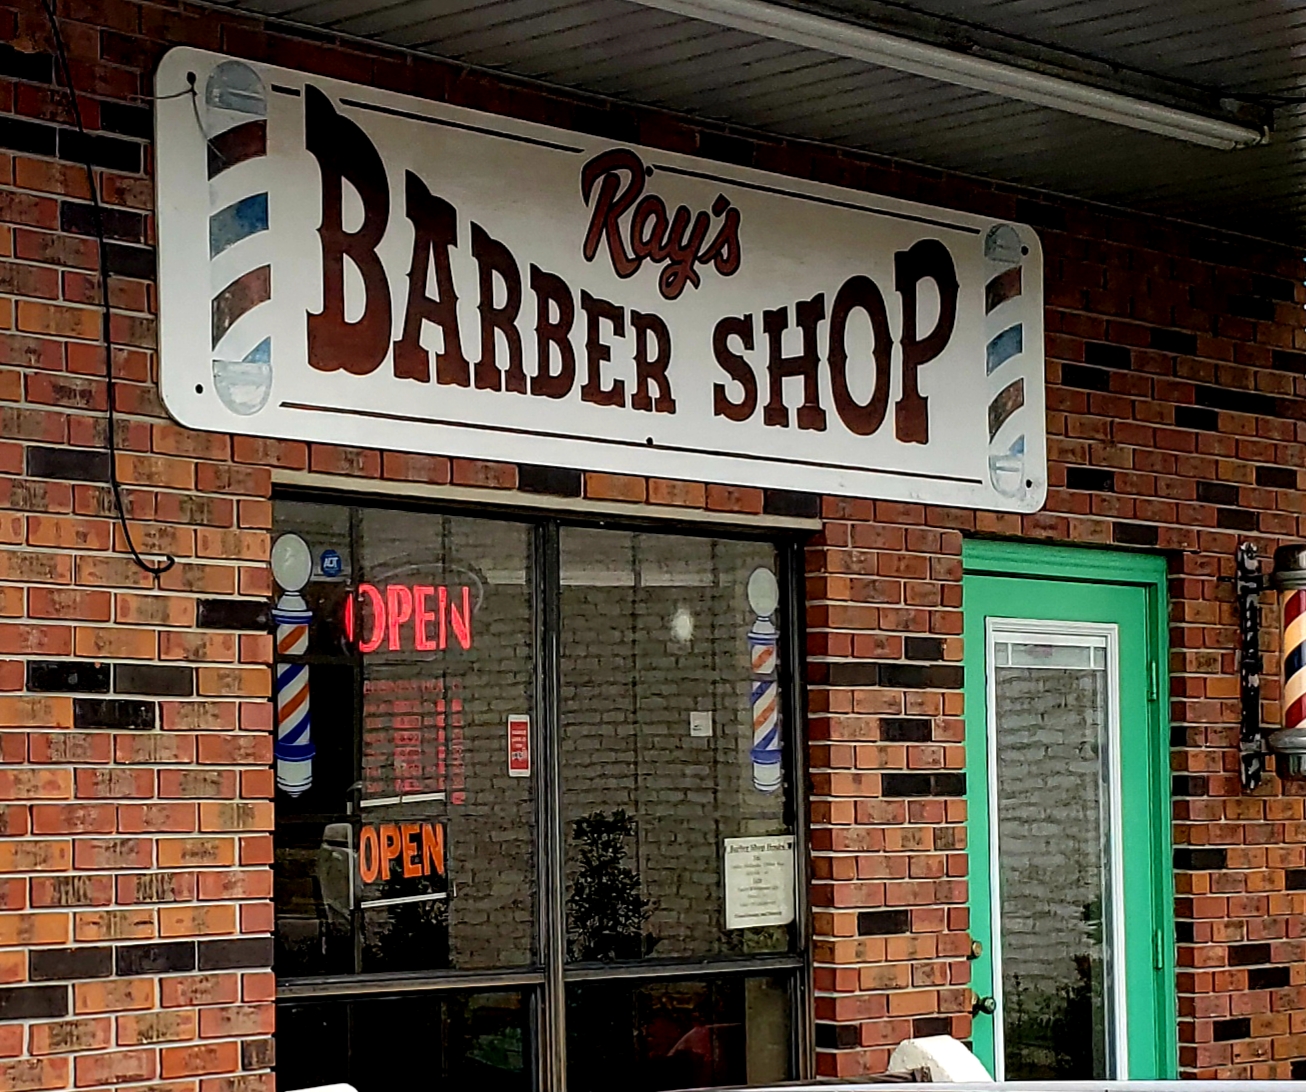 Ray's Barber Shop